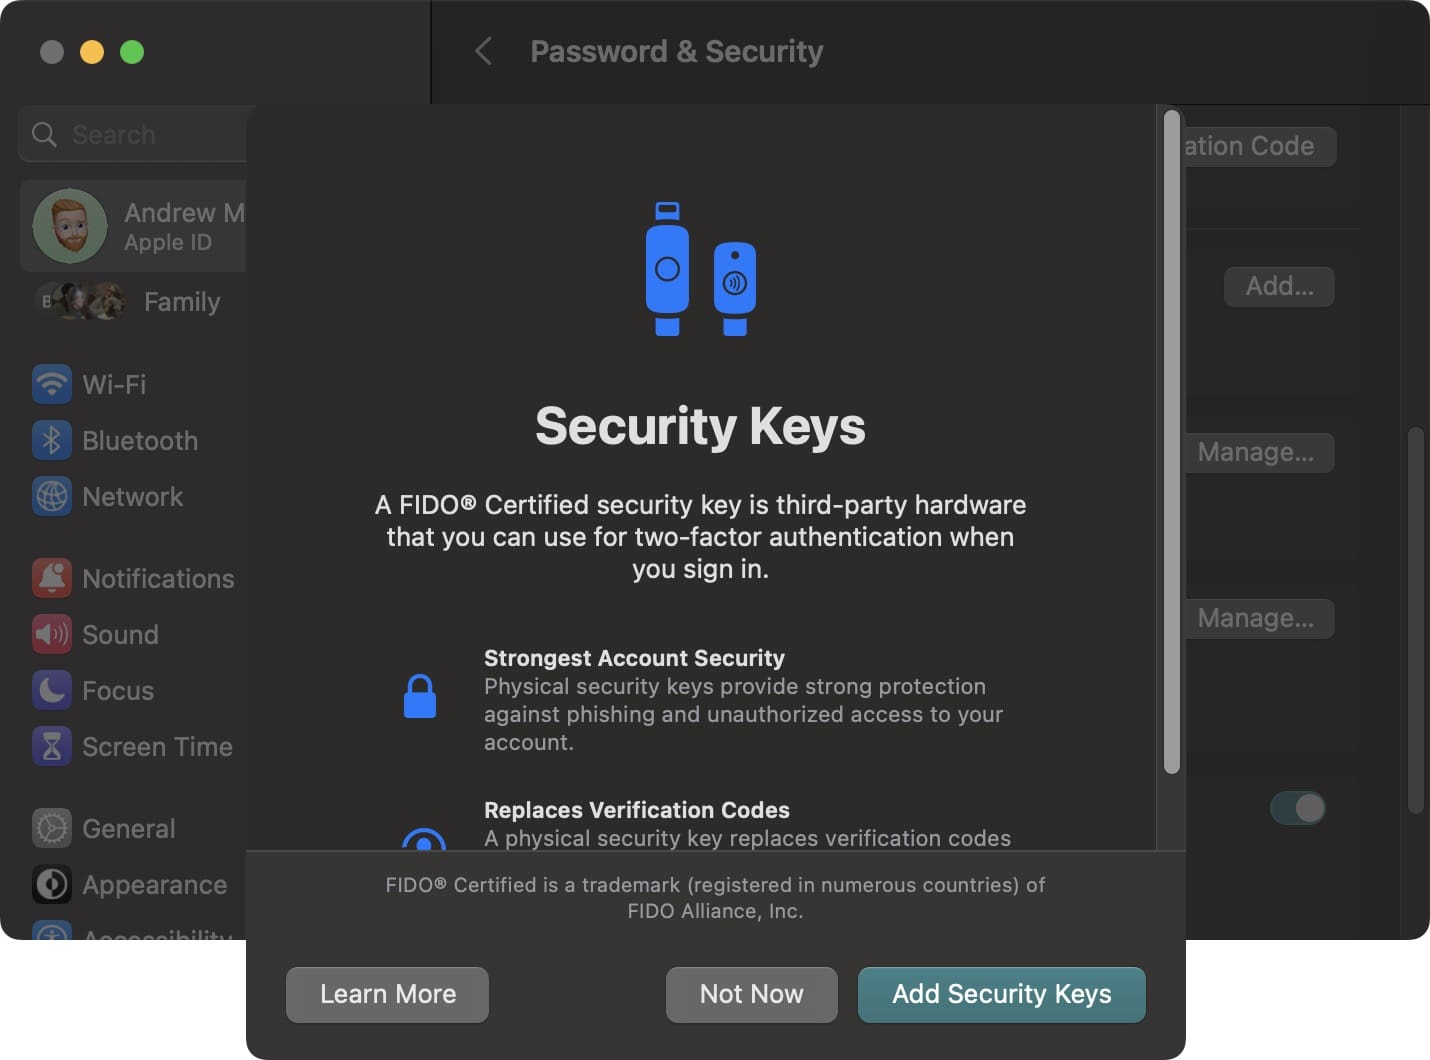 How to use Security Keys on Mac - 5